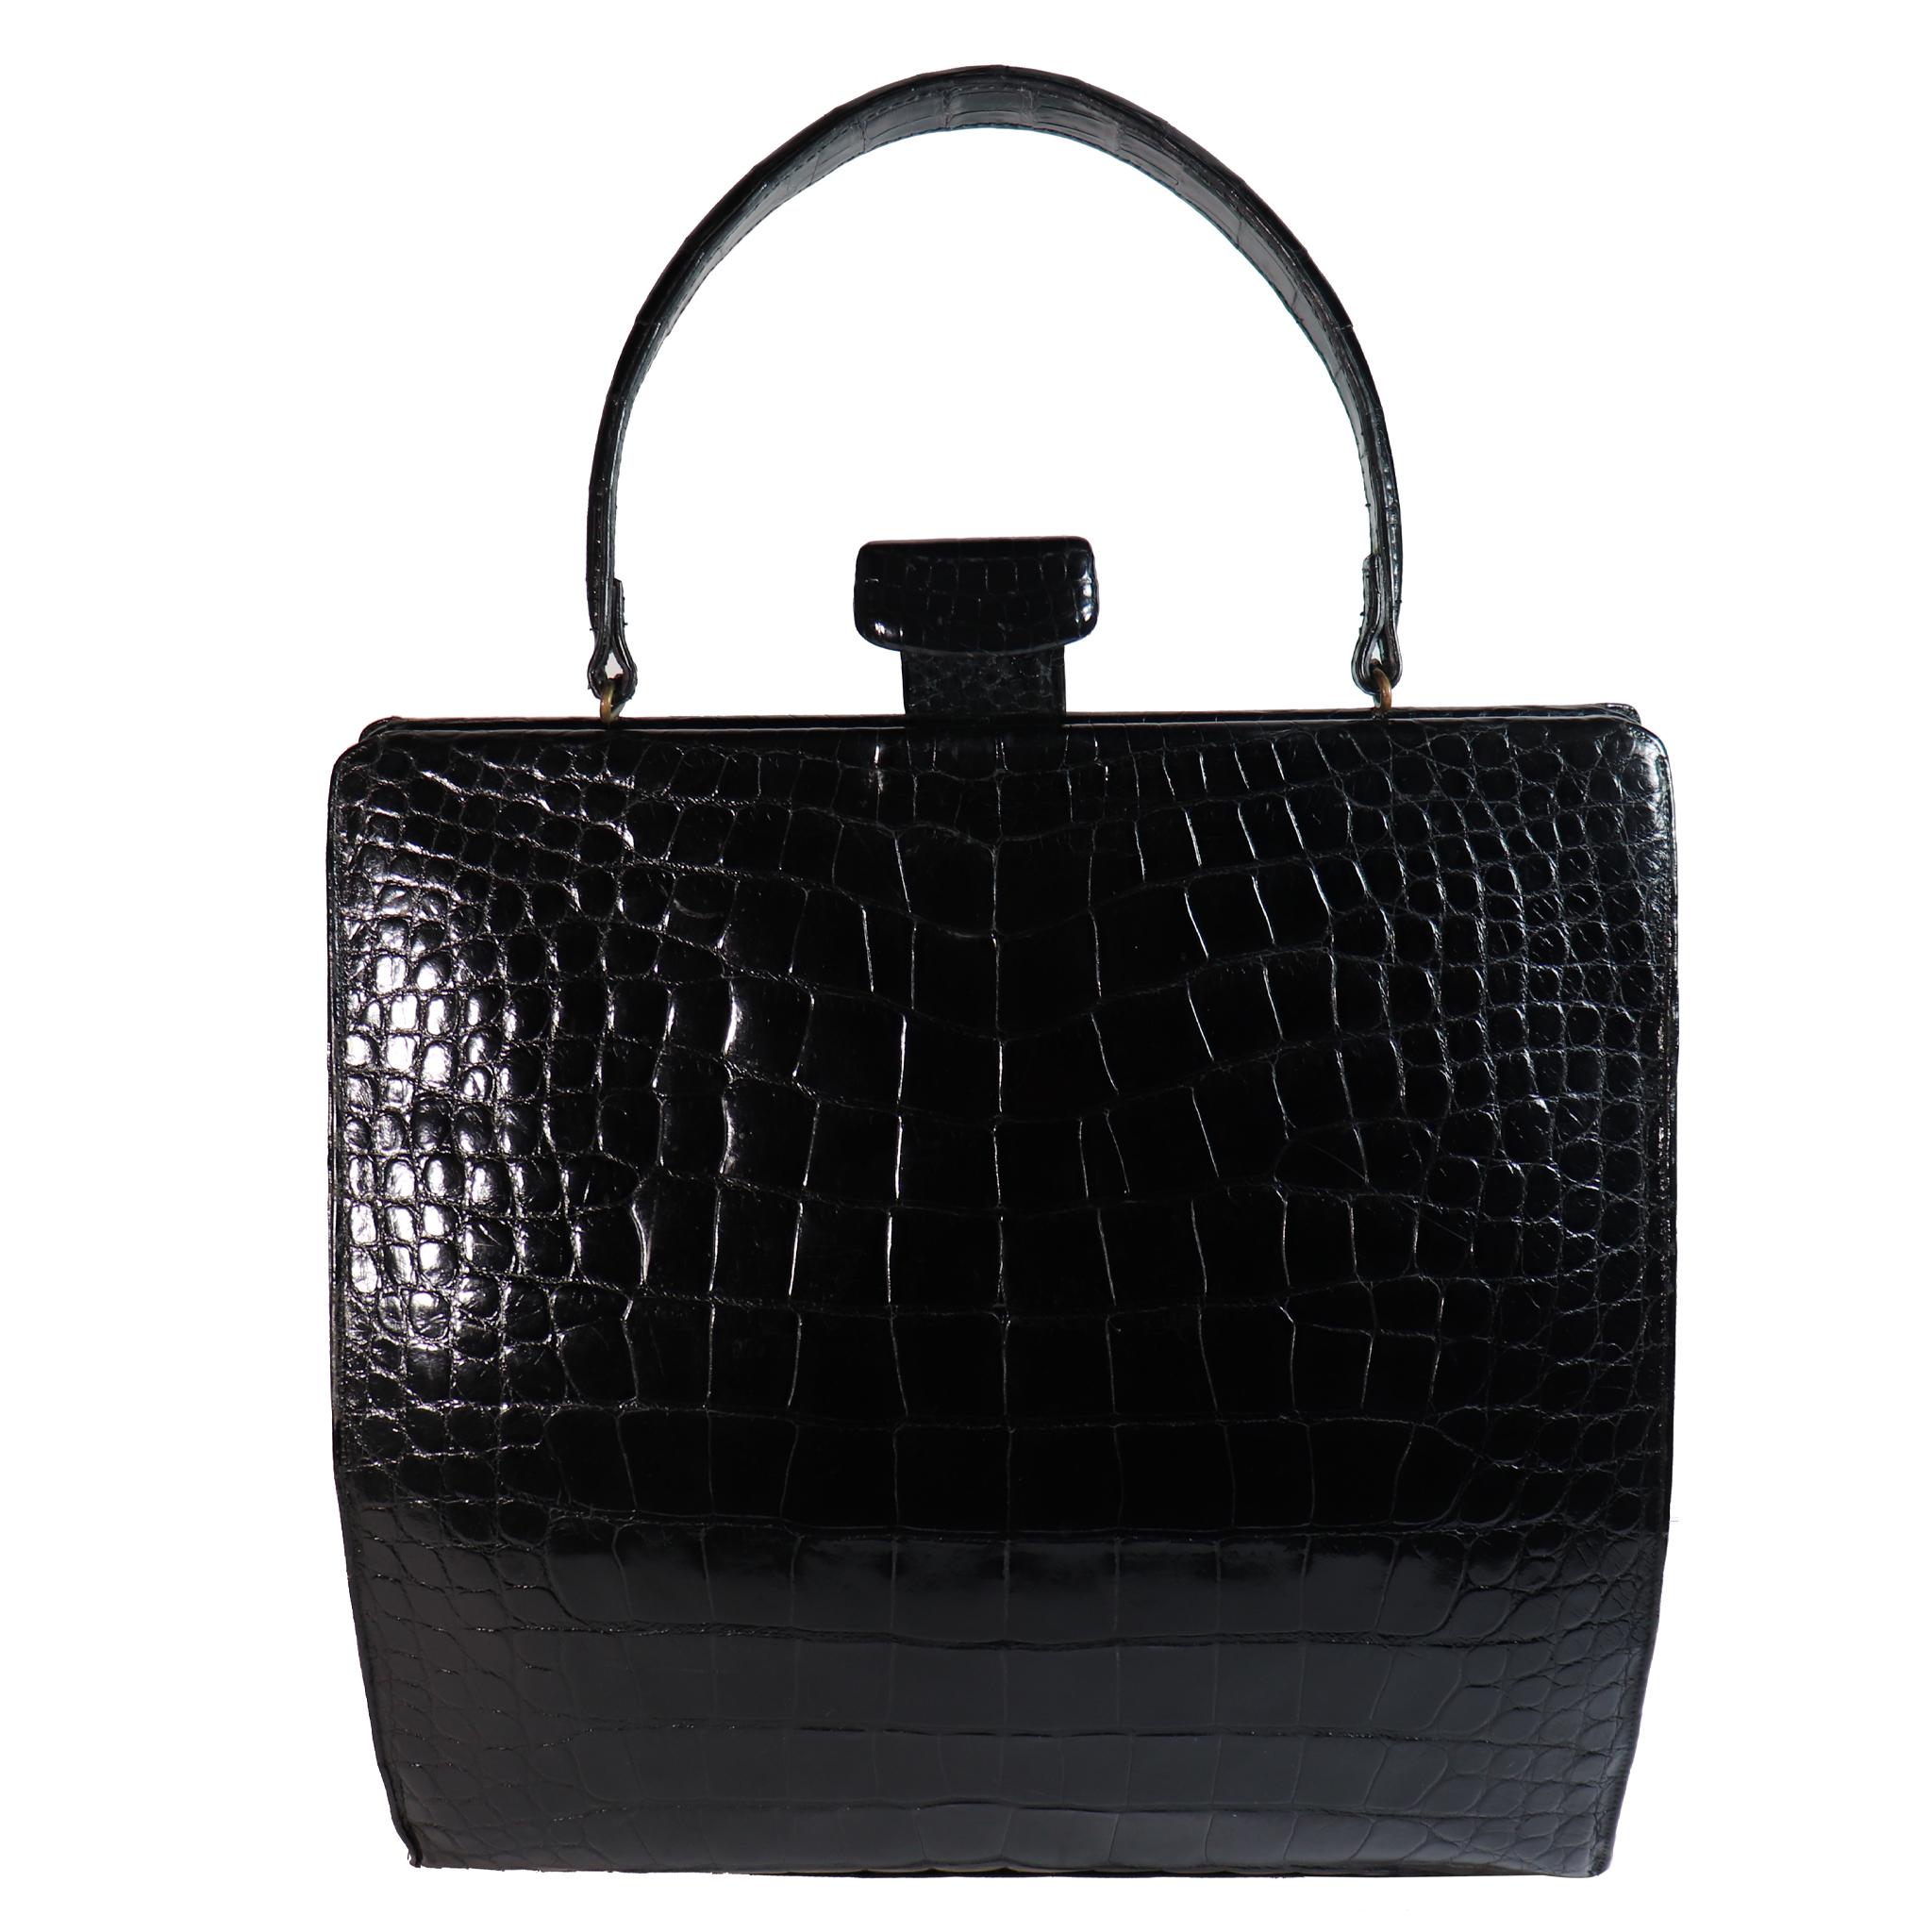 Lucille de Paris Large Crocodile Top Handle Bag made in America, comes with coin purse and Lucille de Paris Mirror. In excellent condition. 

VERY RARE 

Measurements 

Height - 11.7 Inches 
Width - 12 Inches 
Height with Strap - 17.8 Inches 